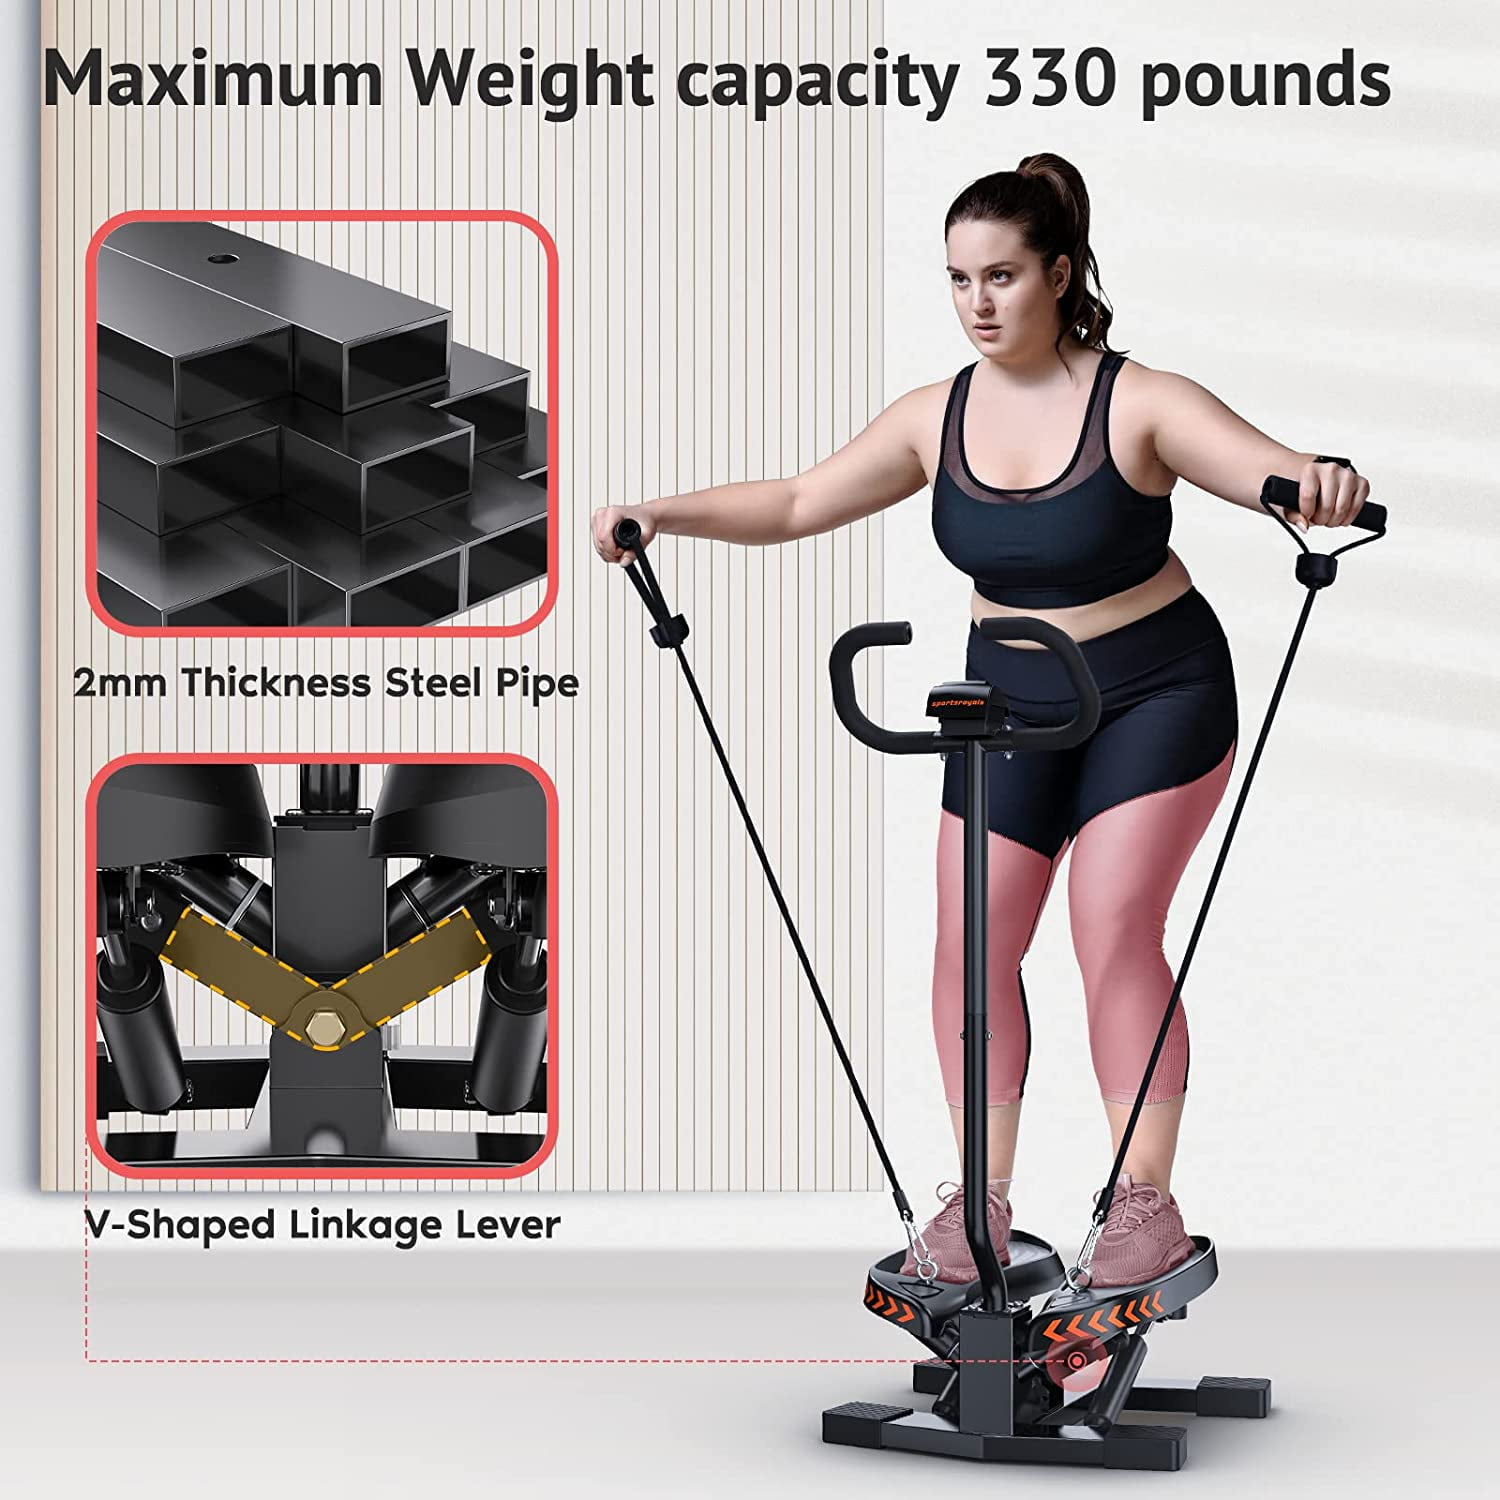  Tohoyard Steppers for Exercise, Mini Stepper Machine with  Resistance Bands & Calories Count, Stair 330 lbs Weight Capacity, Portable  Equipment Home Workout, Dark Black : Sports & Outdoors